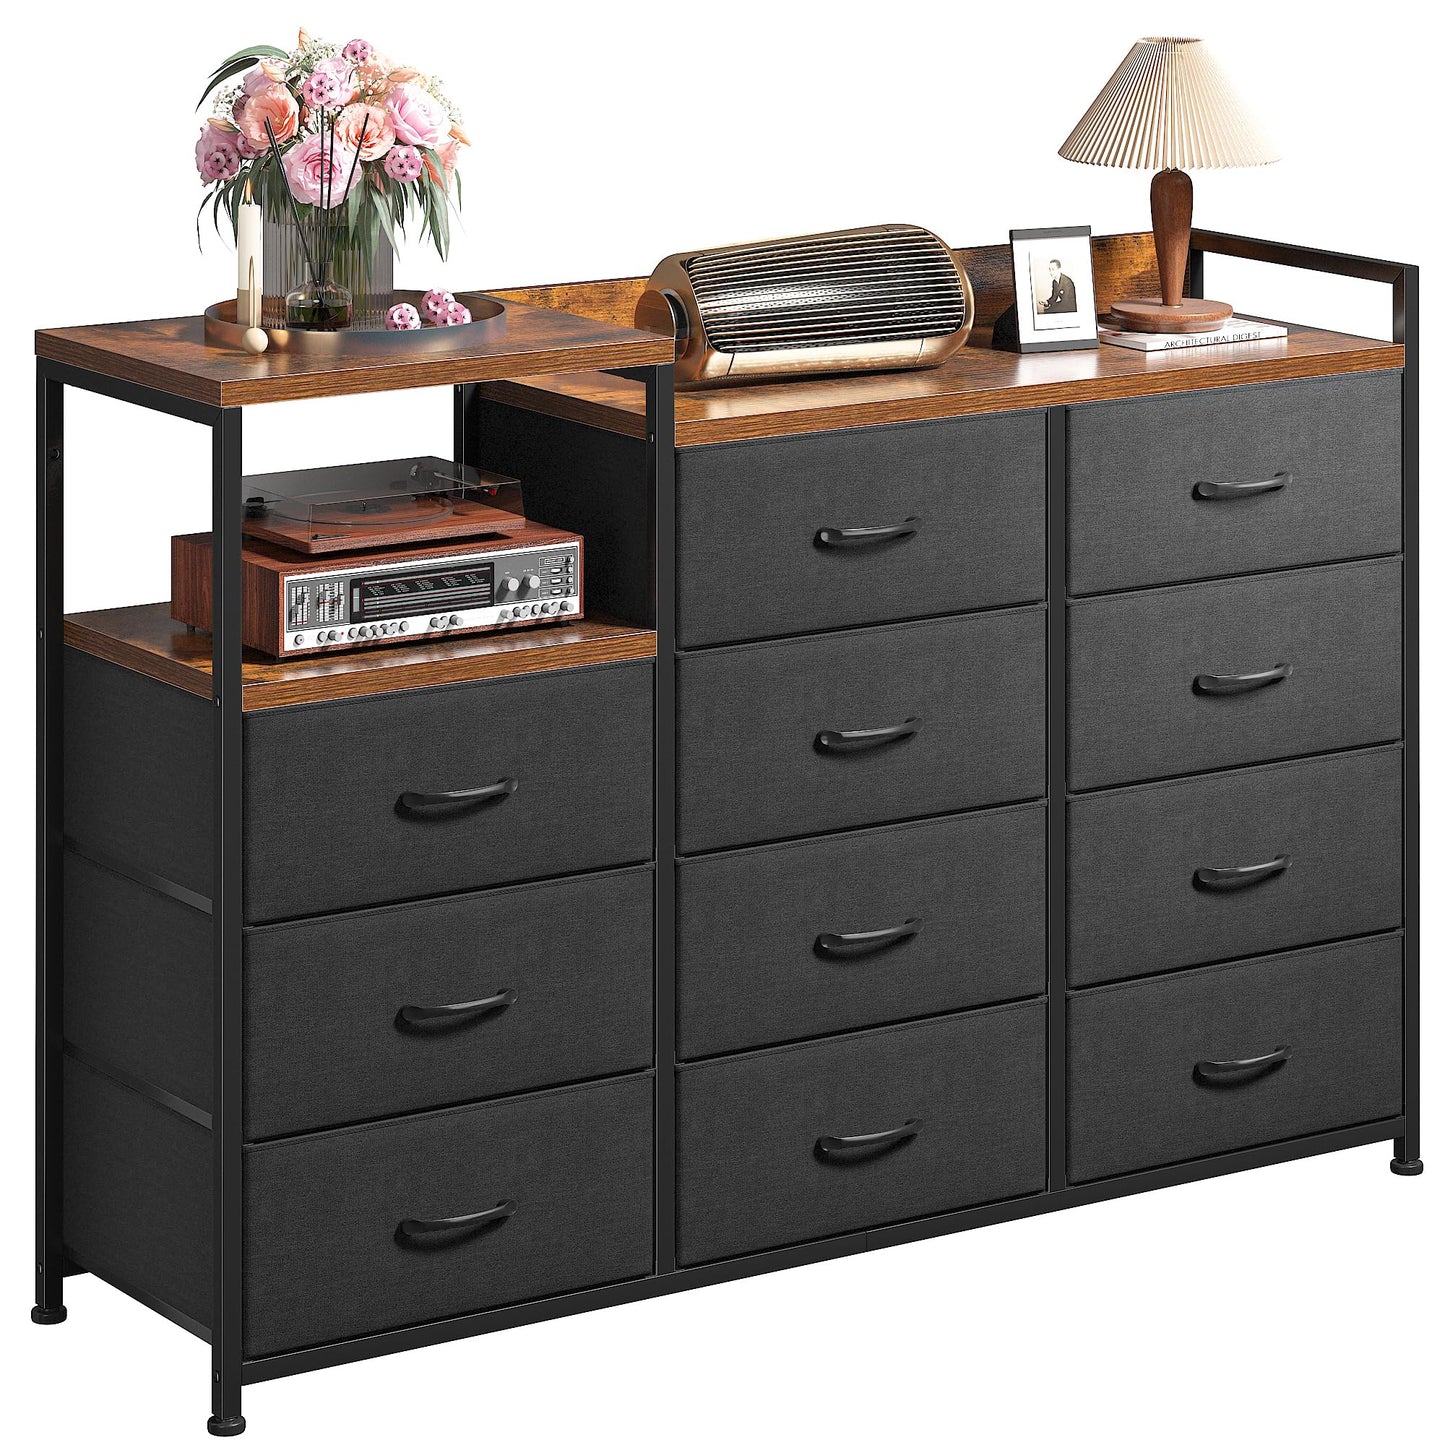 Hana Exports Dresser, Dresser for Bedroom with 11 Drawers, Dresser TV Stand with Shelves, Long Dressers & Chests of Drawers, Wide Dresser for Bedroom Dresser with Sturdy Metal Frame & Wood Top, Black